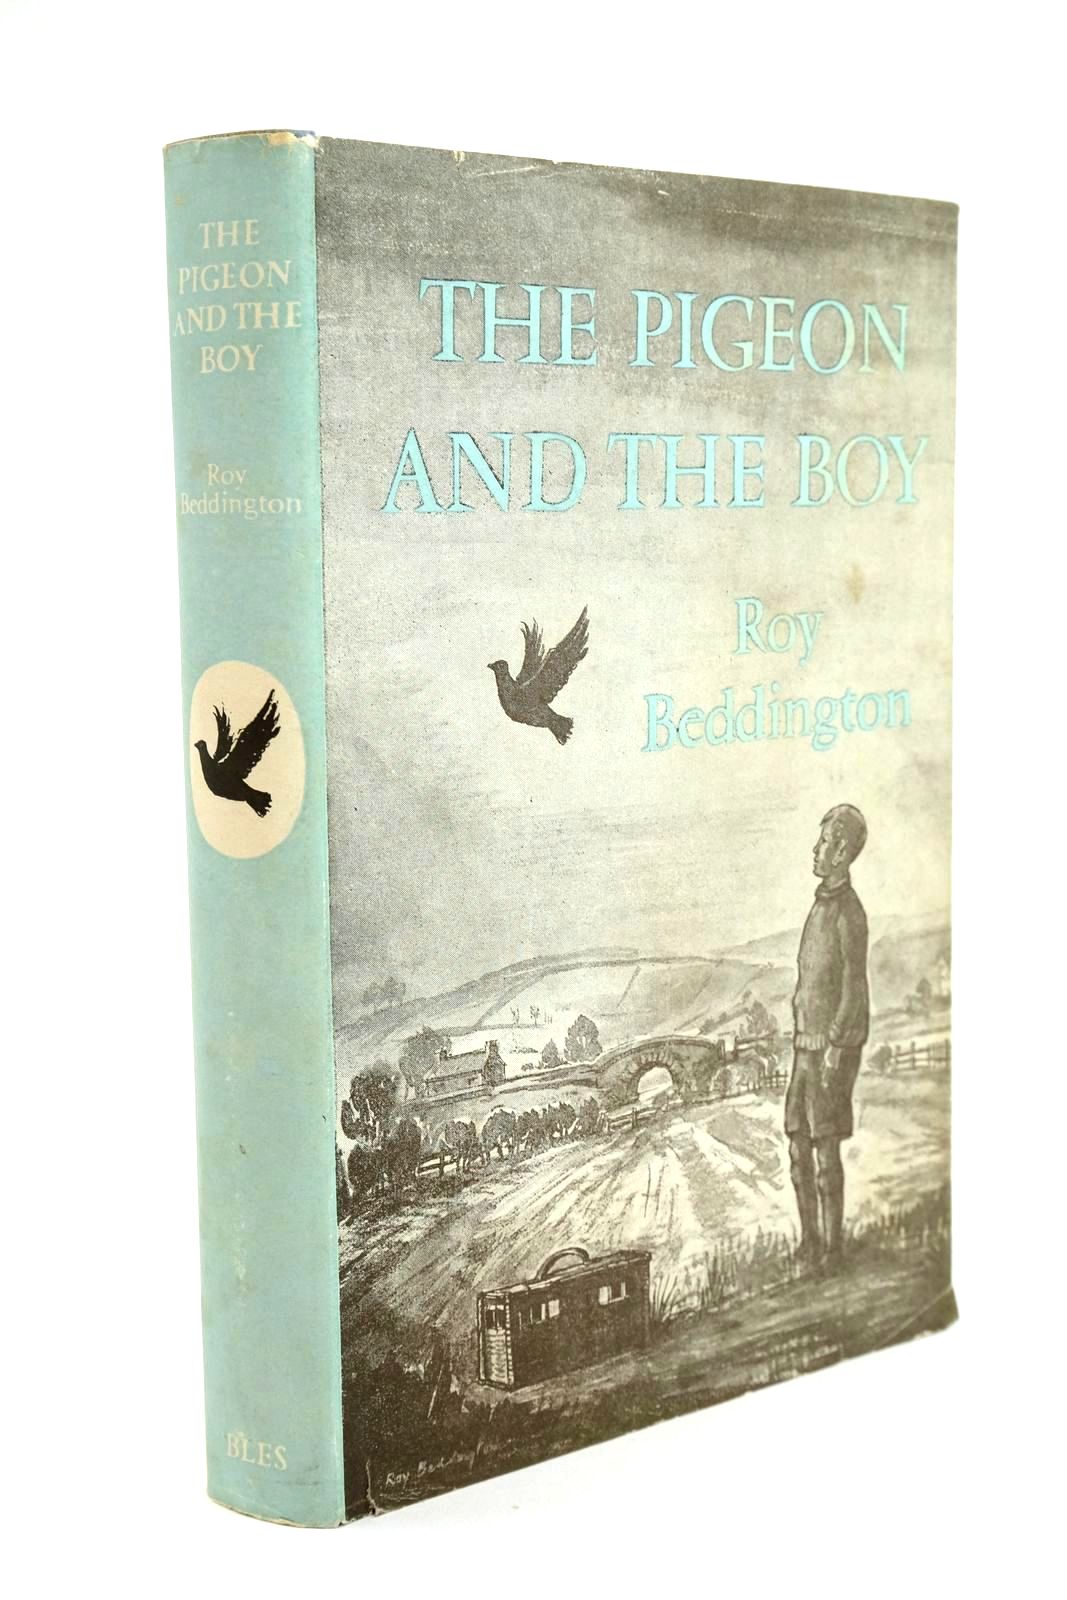 Photo of THE PIGEON AND THE BOY written by Beddington, Roy illustrated by Beddington, Roy published by Geoffrey Bles Ltd. (STOCK CODE: 1321663)  for sale by Stella & Rose's Books